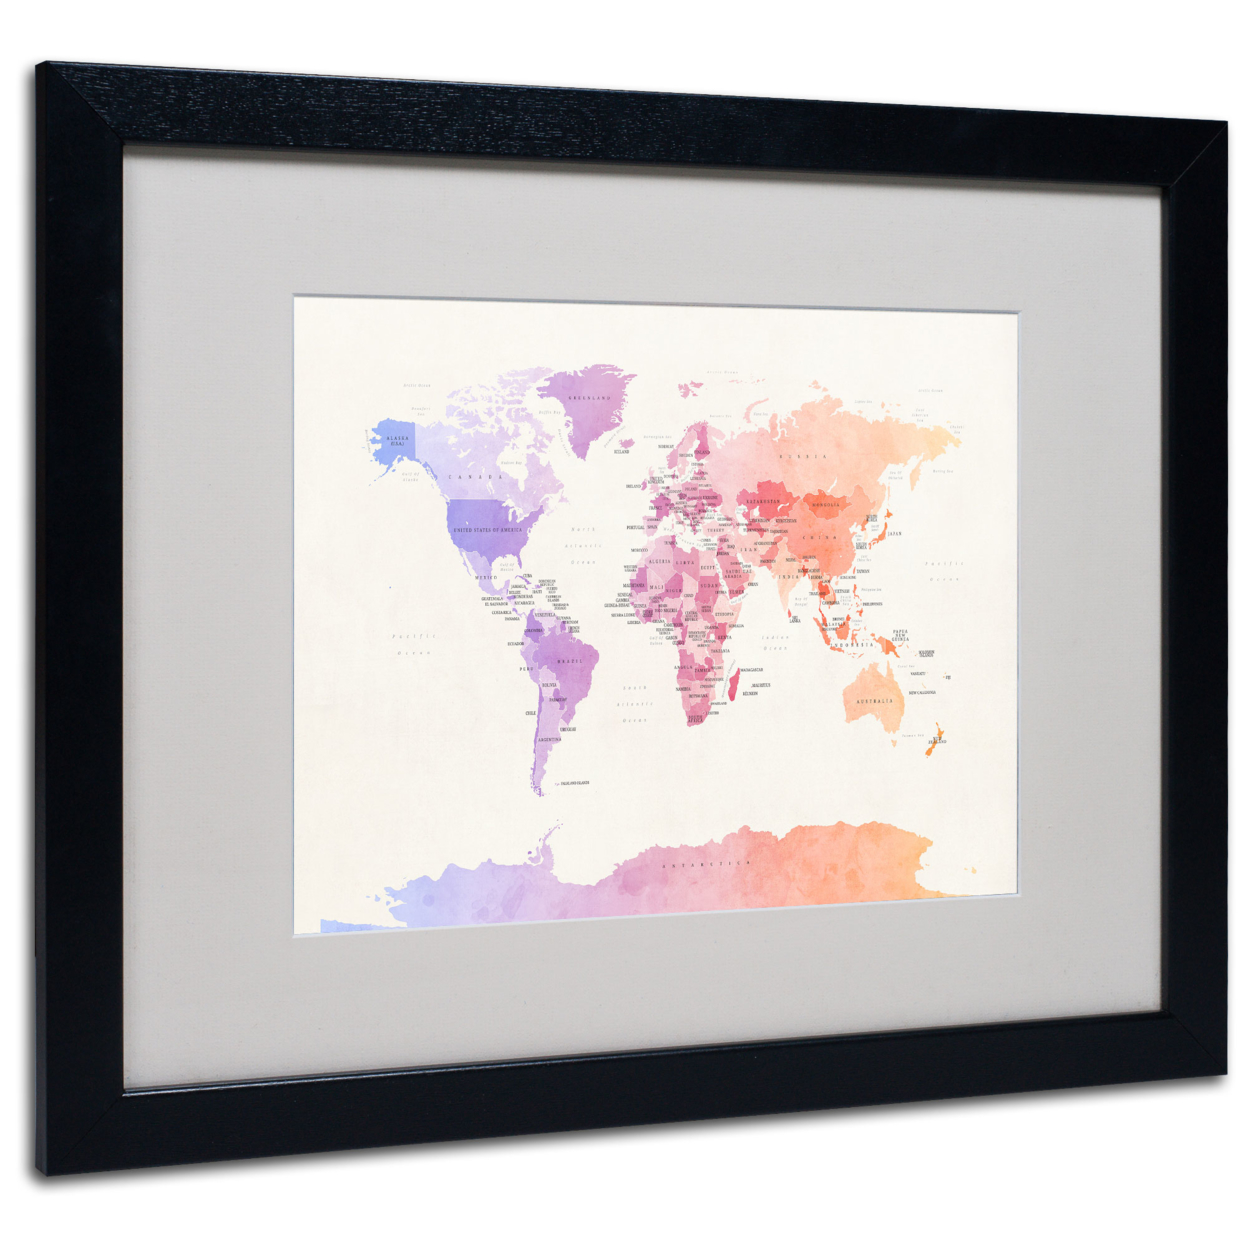 Michael Tompsett 'Poltical Watercolor Map' Black Wooden Framed Art 18 X 22 Inches